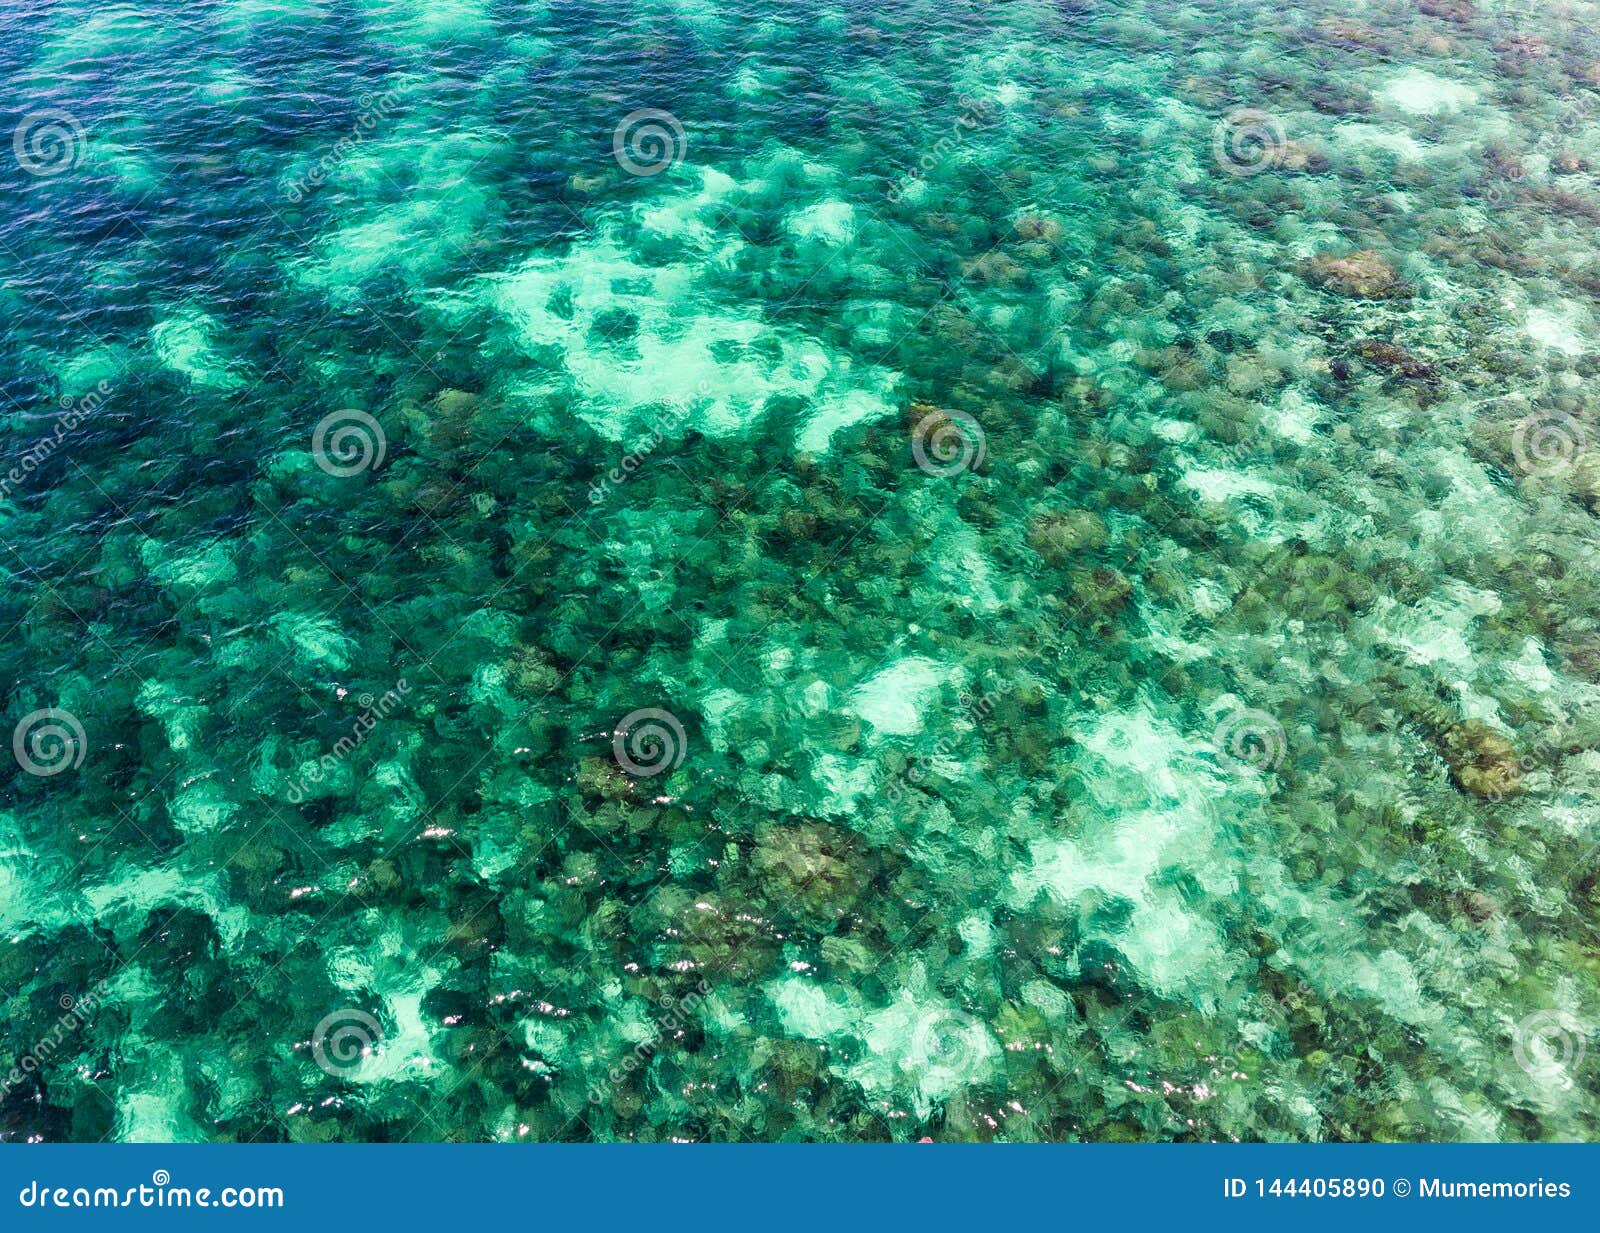 Tropical Emerald Sea With Coral Reef In Andaman Island